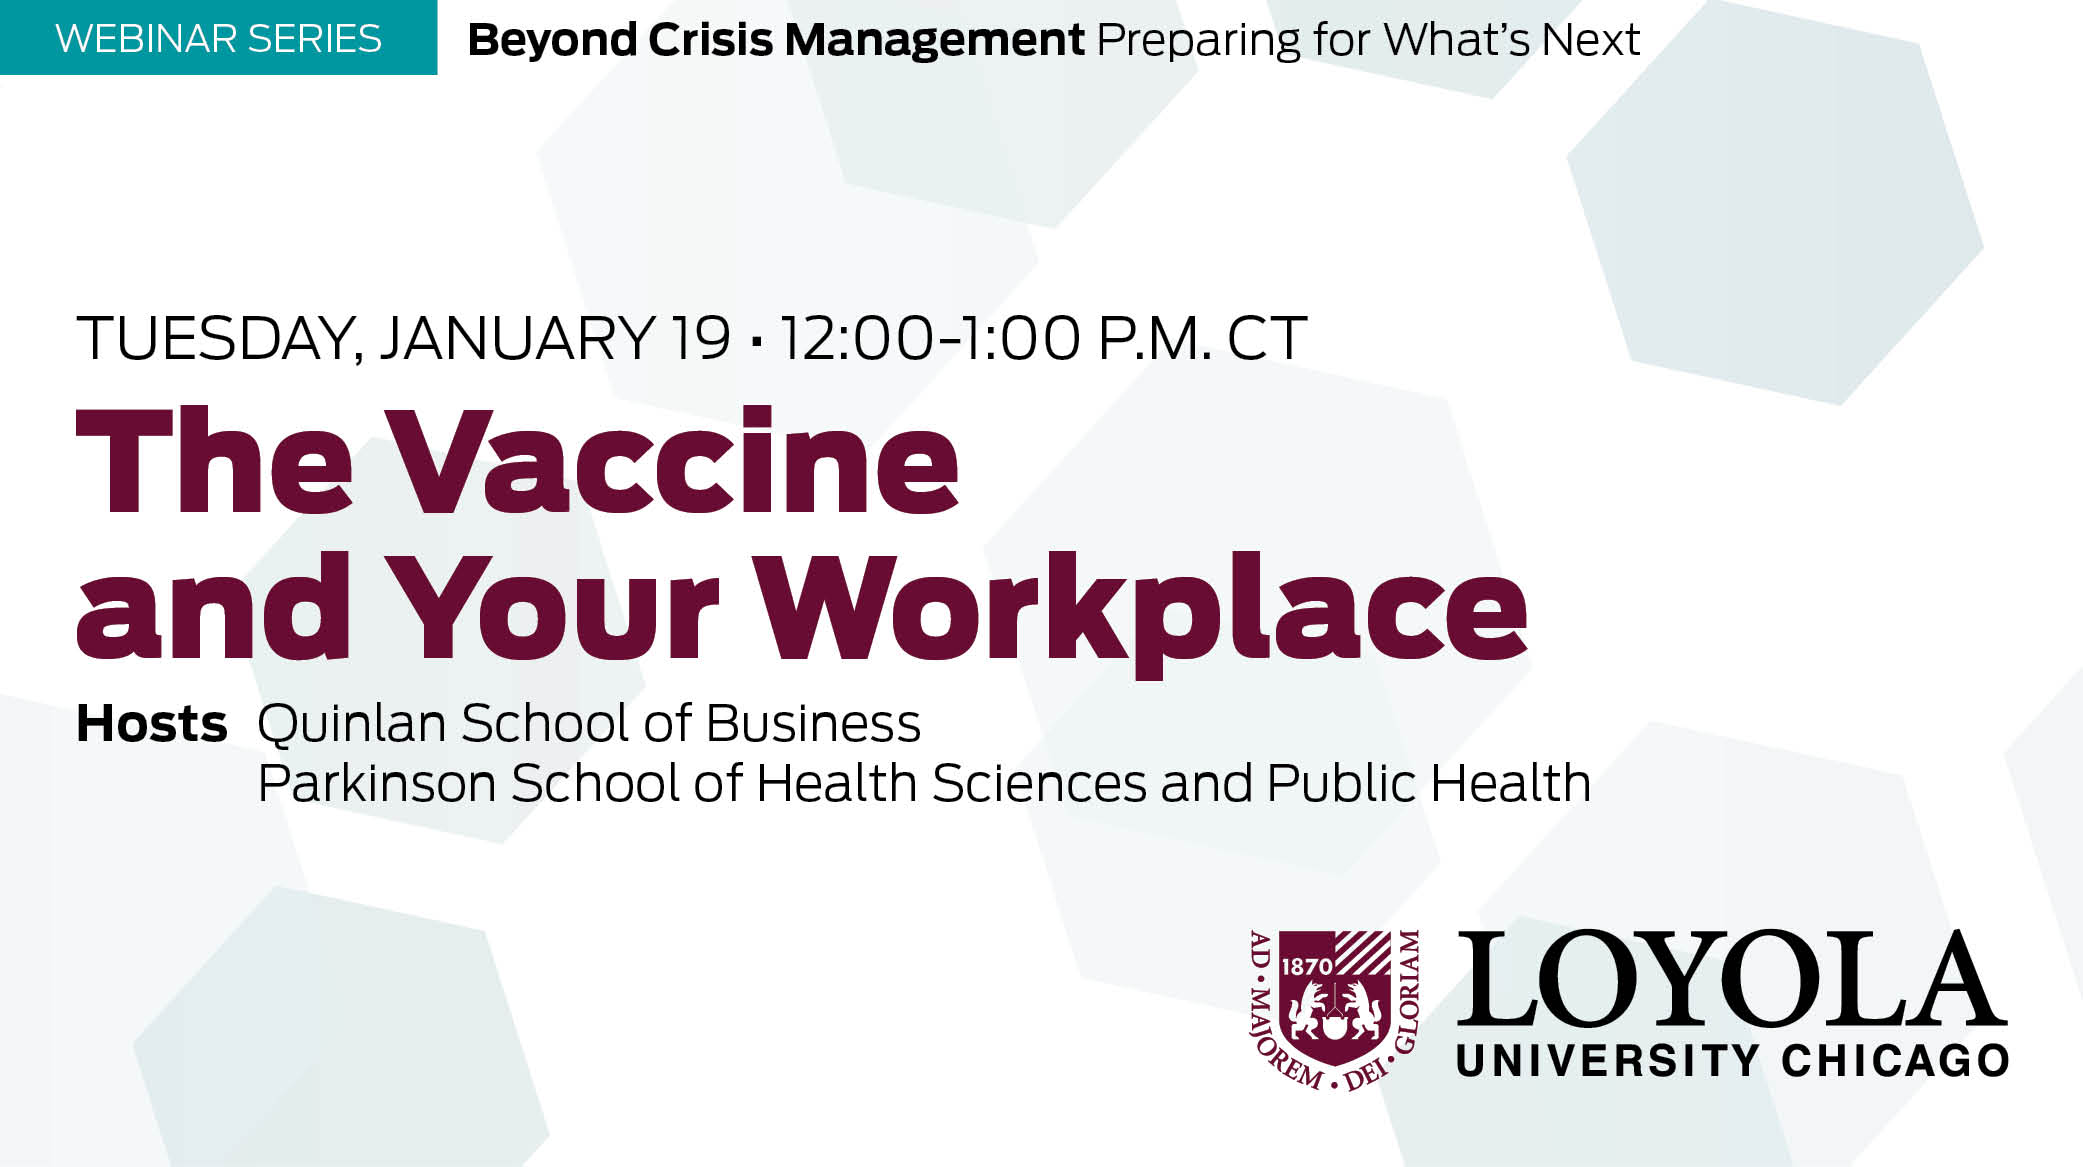 The Vaccine and Your Workplace